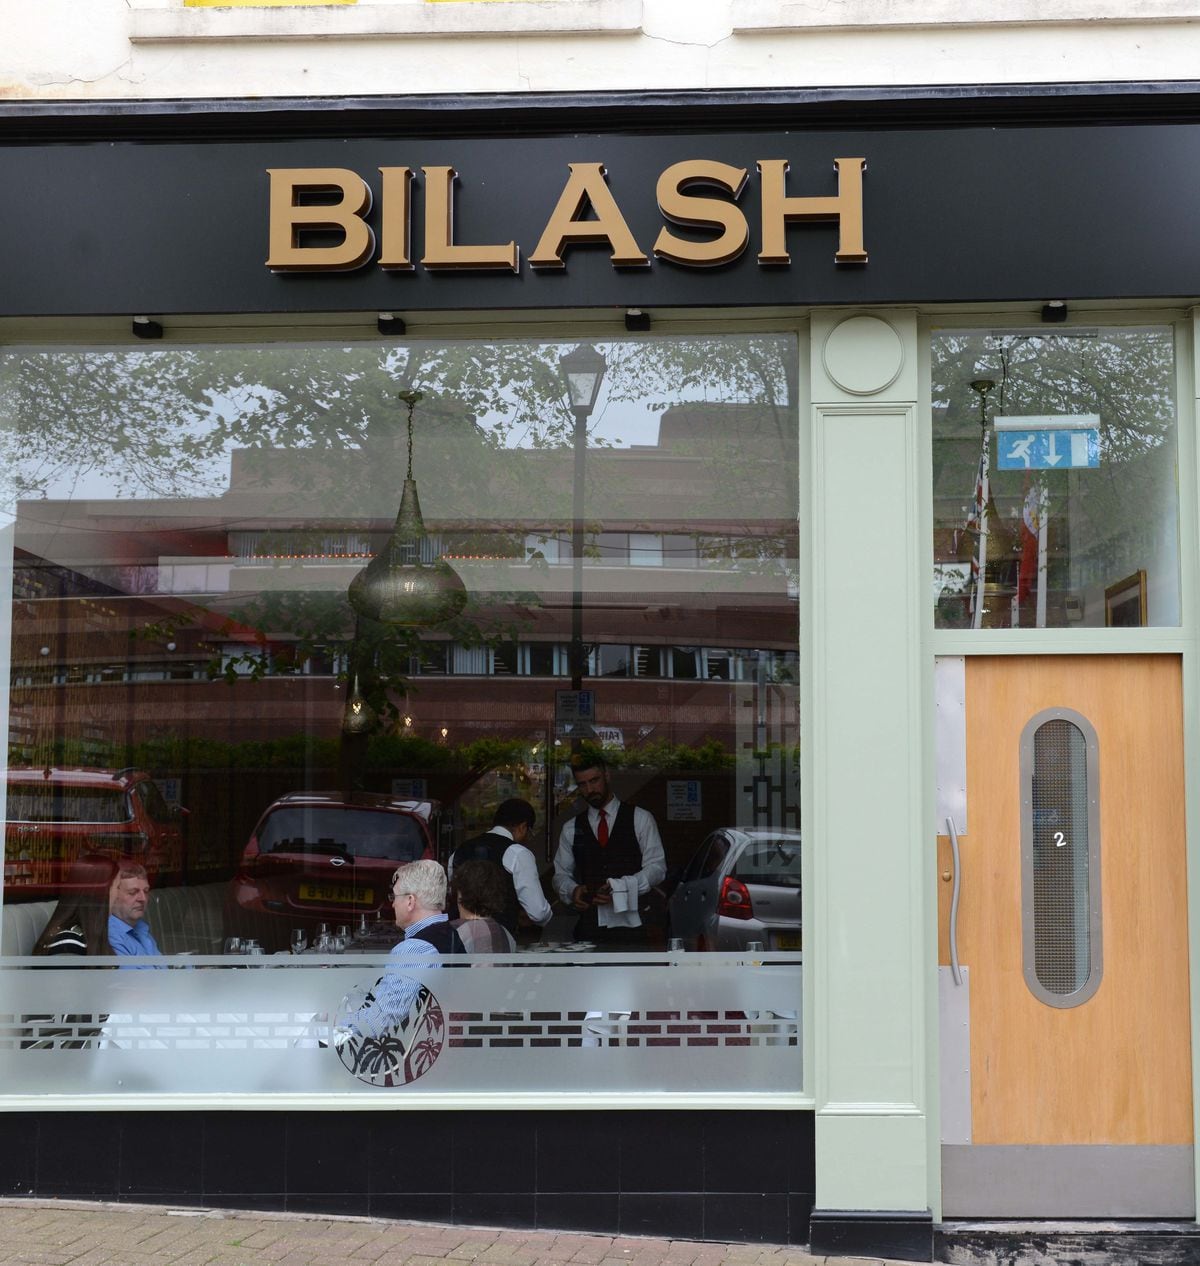 The Bilash has been established for some 35 years